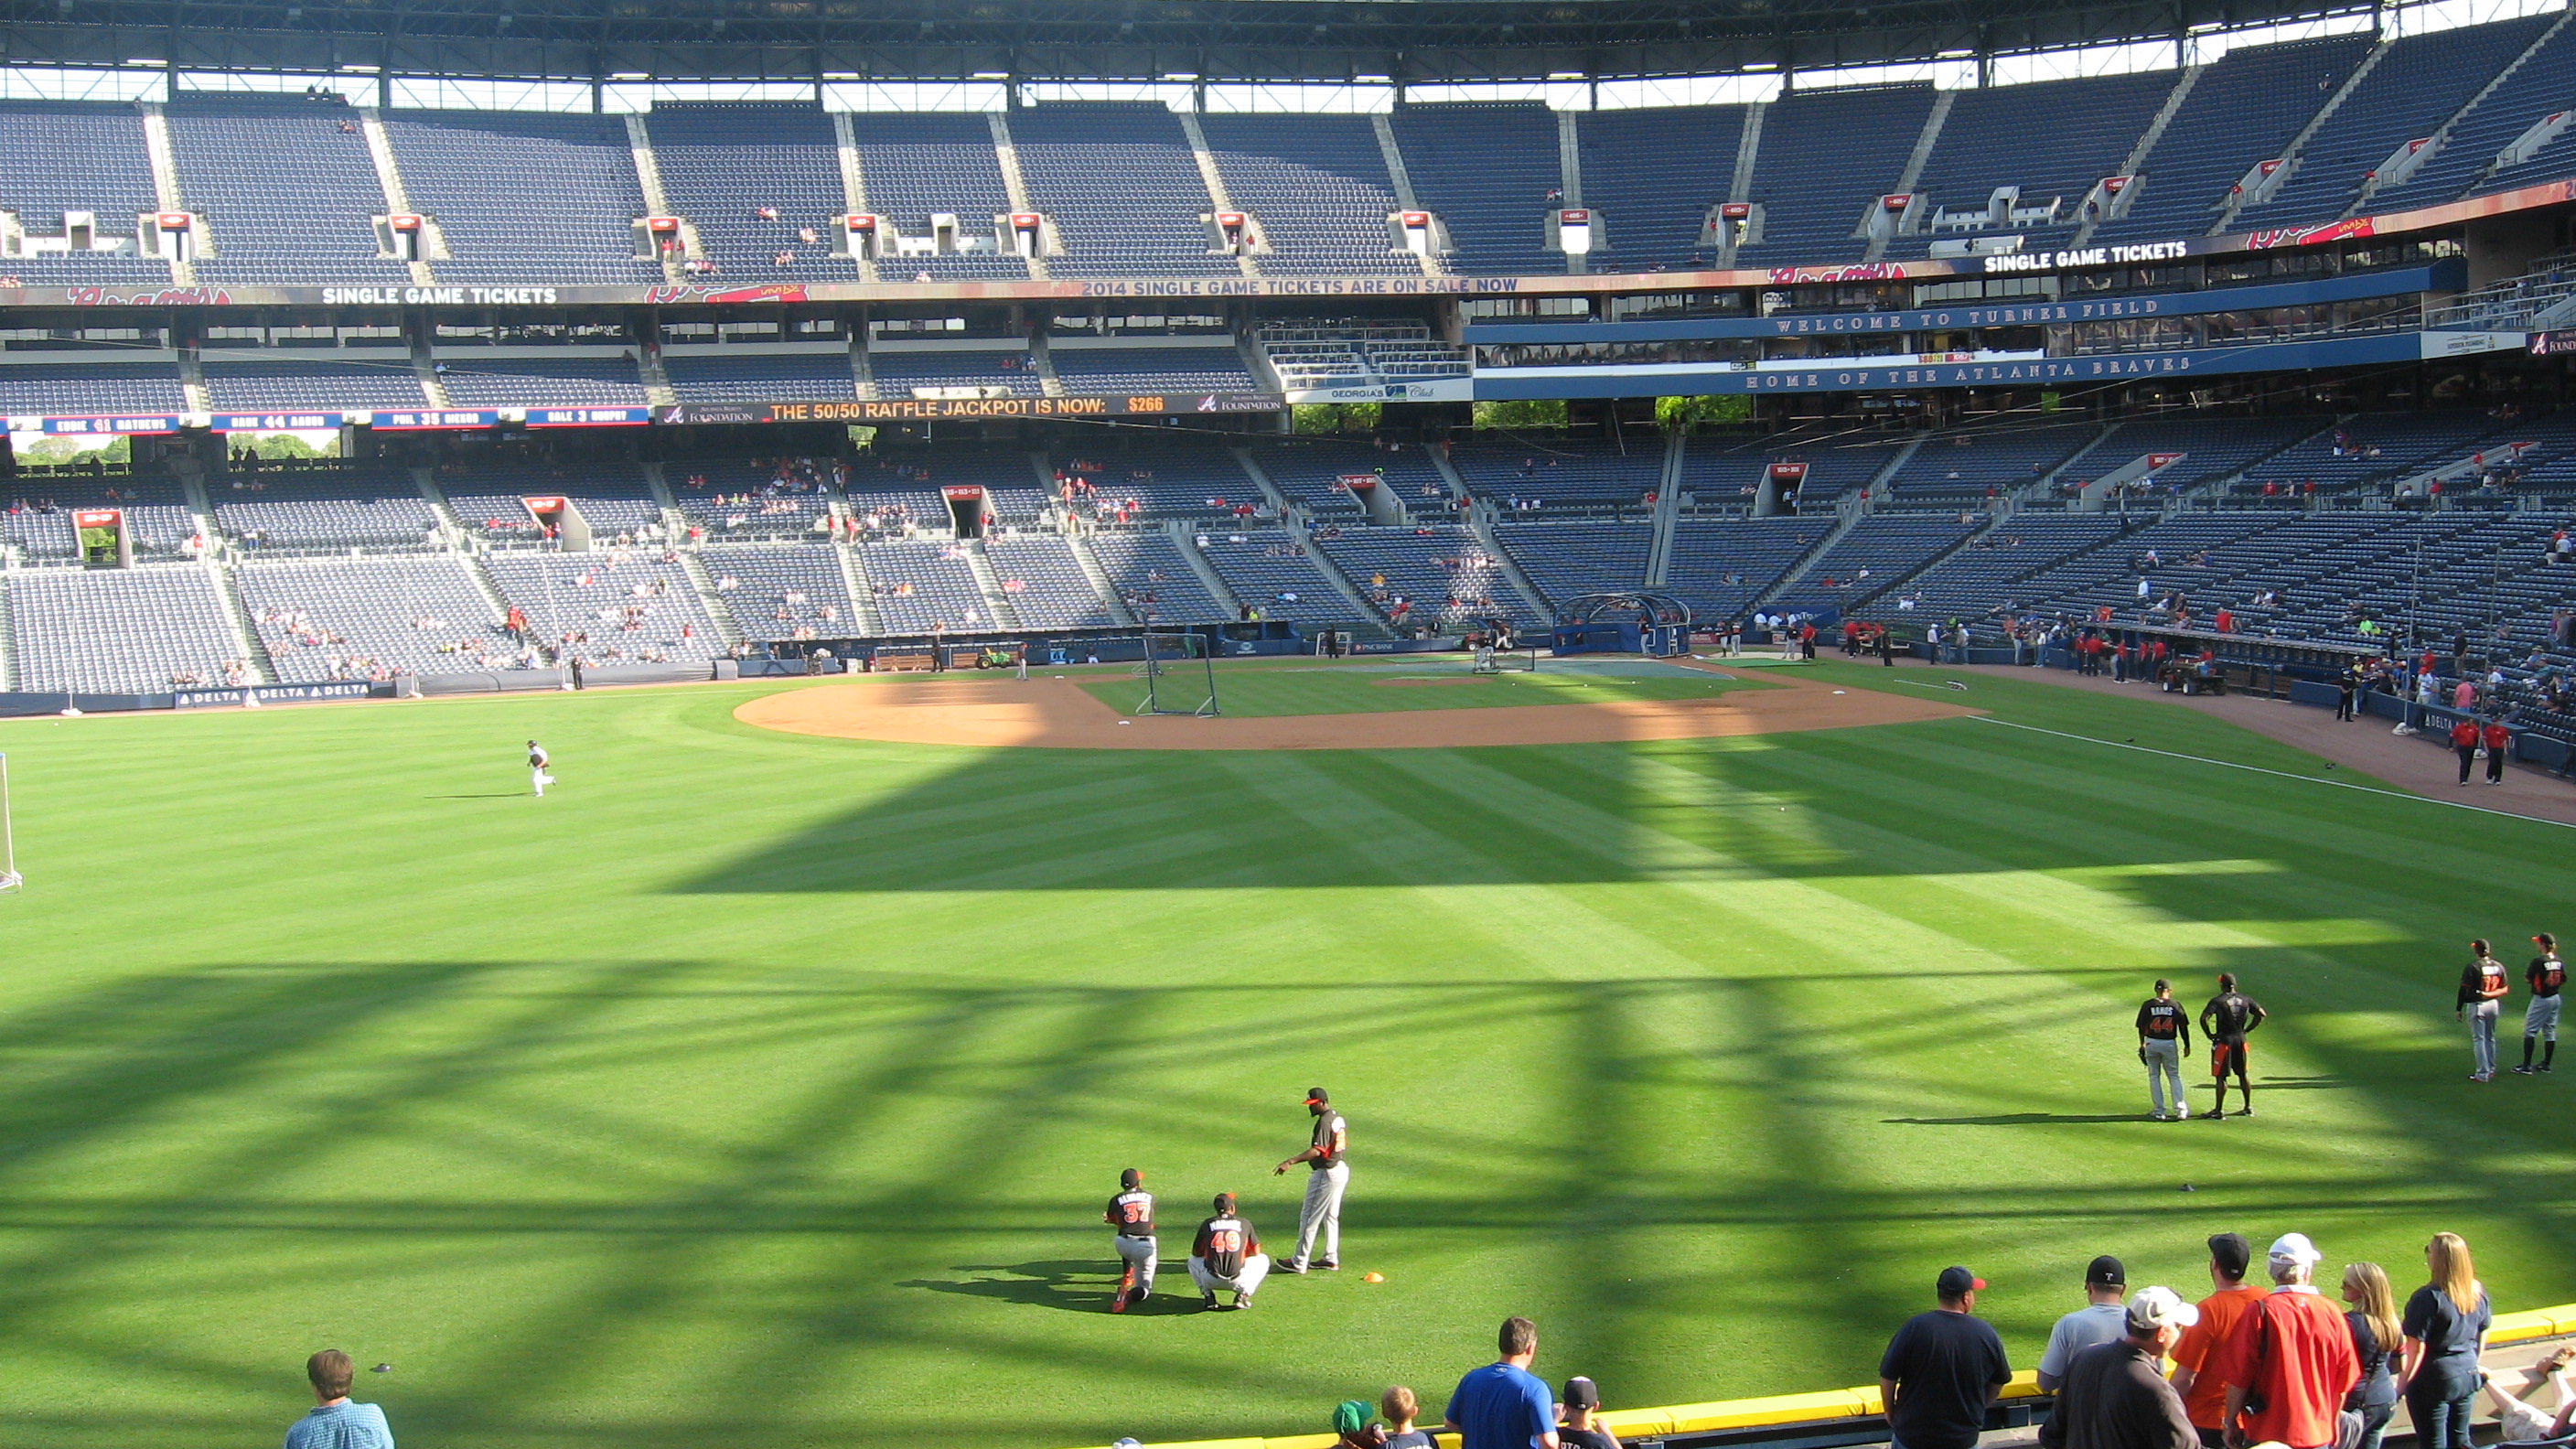 Vantage Points in Atlanta: Breaking down the Turner Field seating chart –  The Top Step